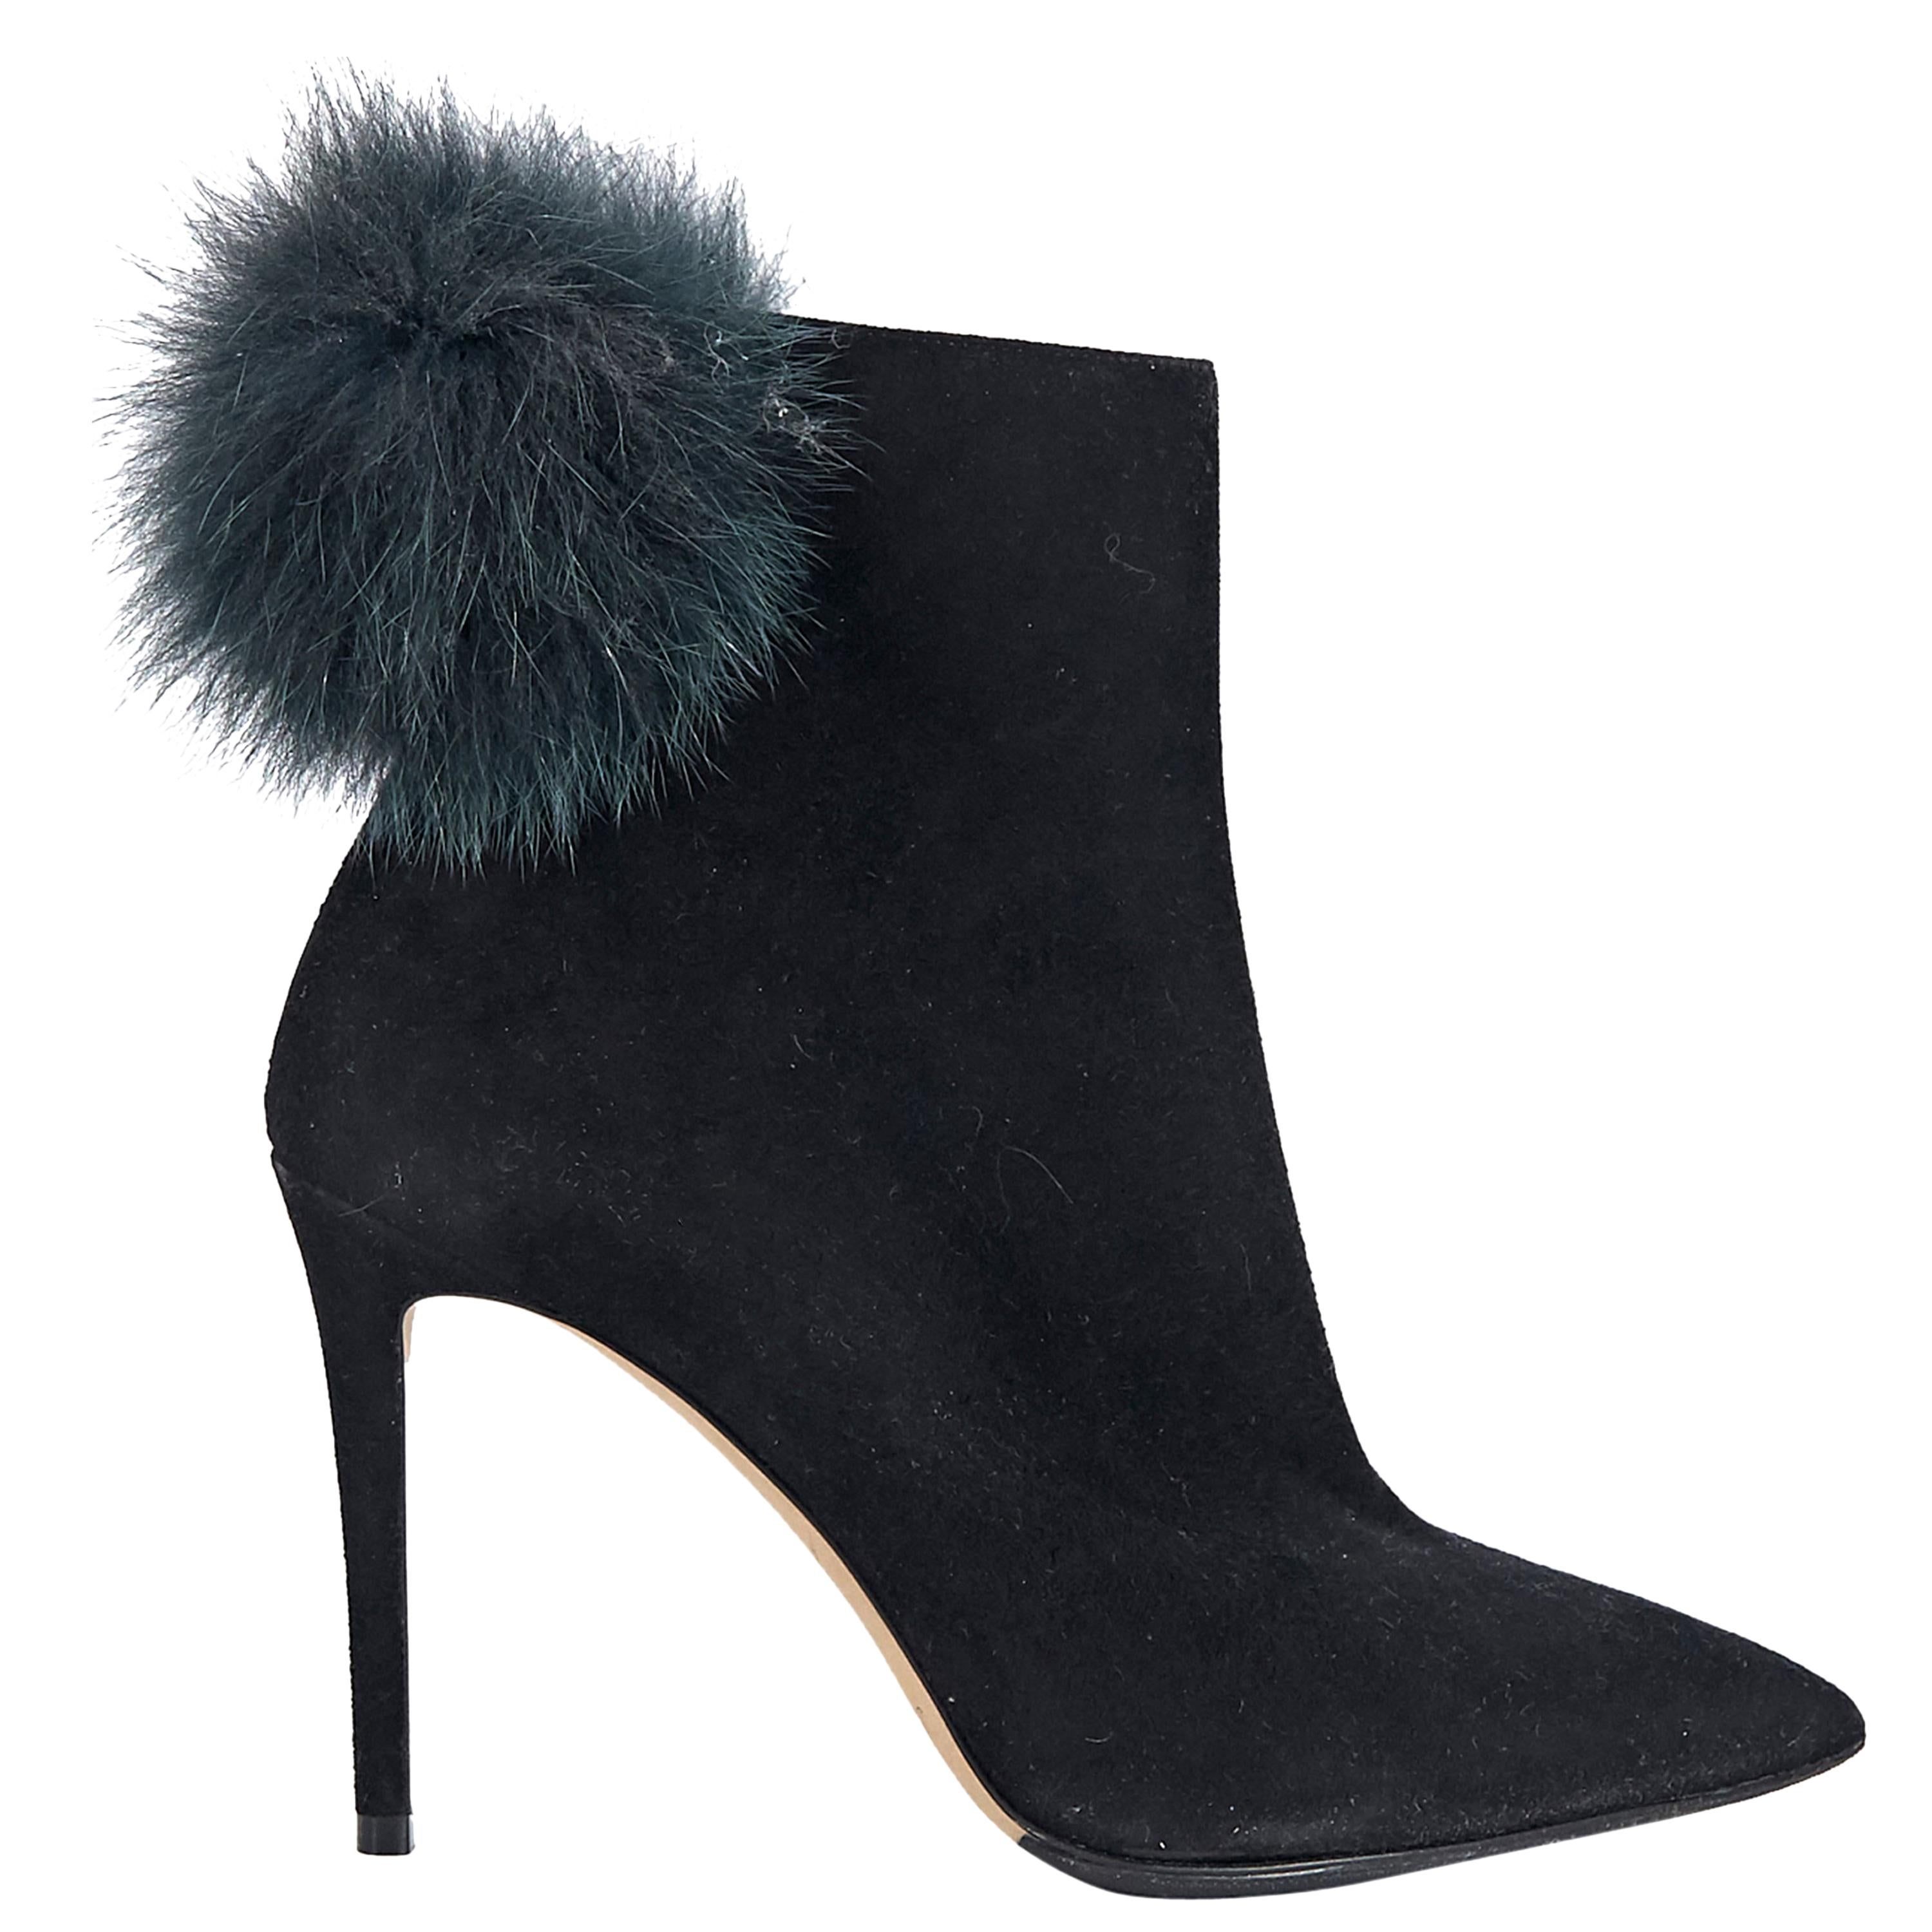 Jimmy Choo Black Fur Pom Suede Ankle Boots